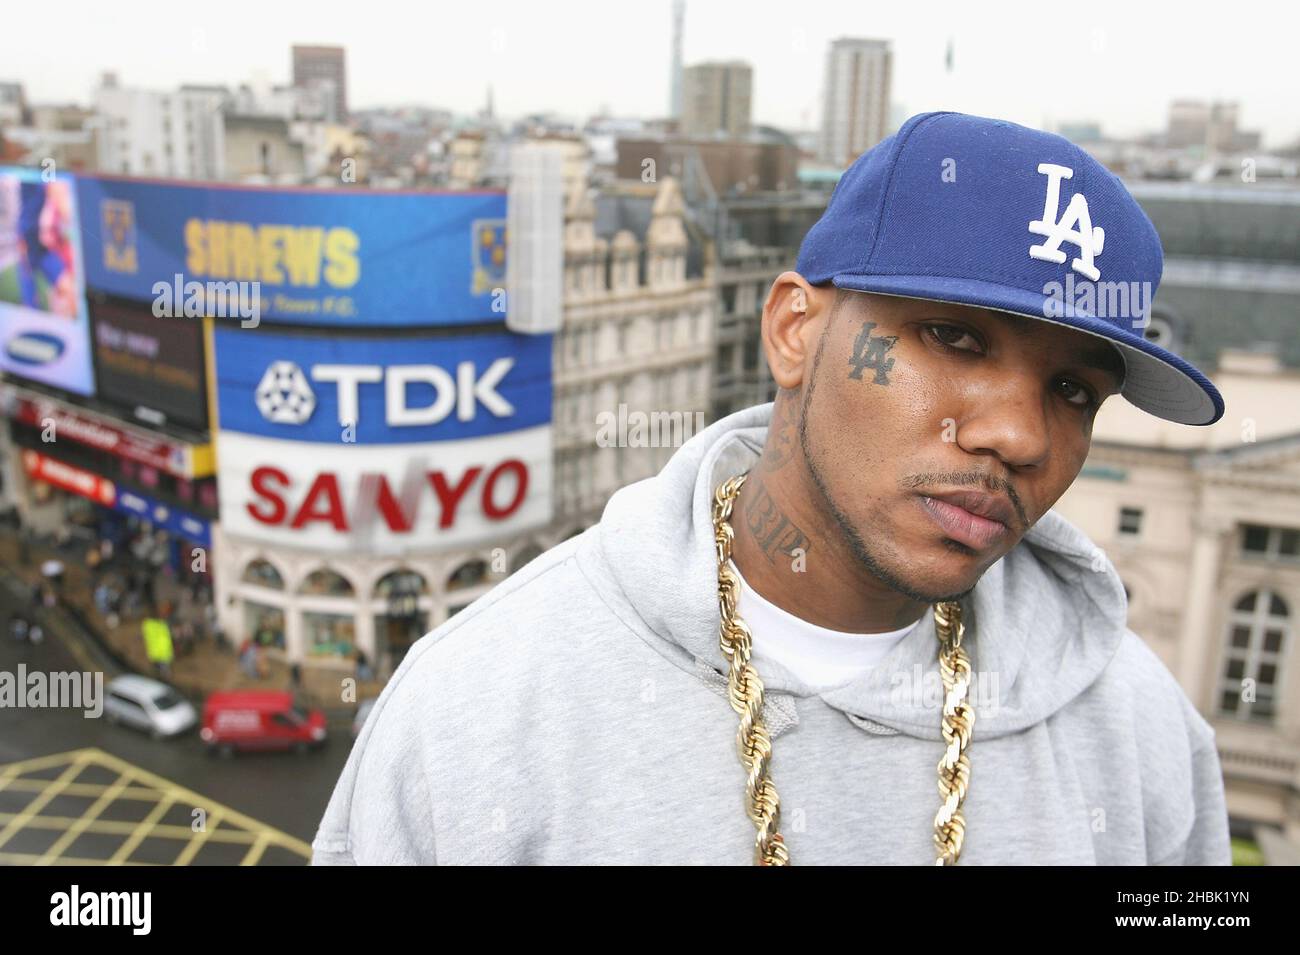 The Game appeared at Lillywhites sports store in London to sign a contract with Lonsdale as official sponsors of his European tour. Stock Photo